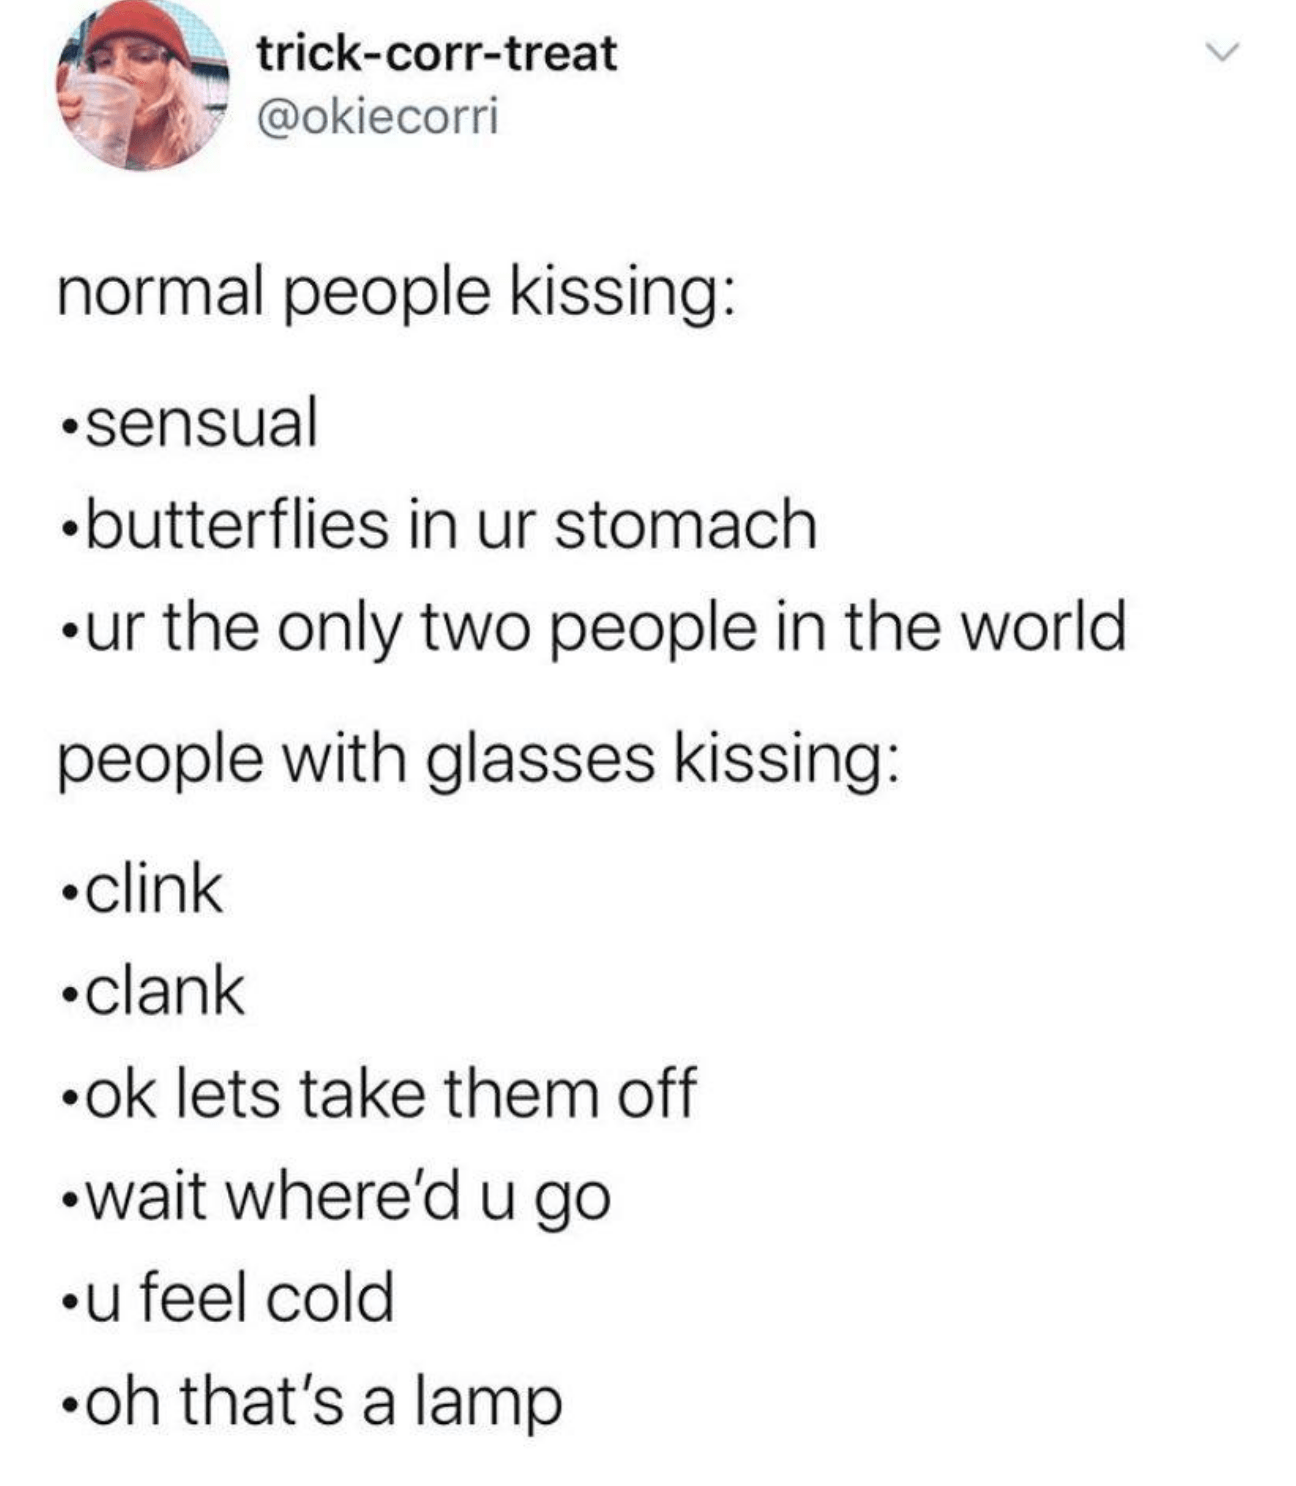 Funny Tweets from Women - normal people kissing